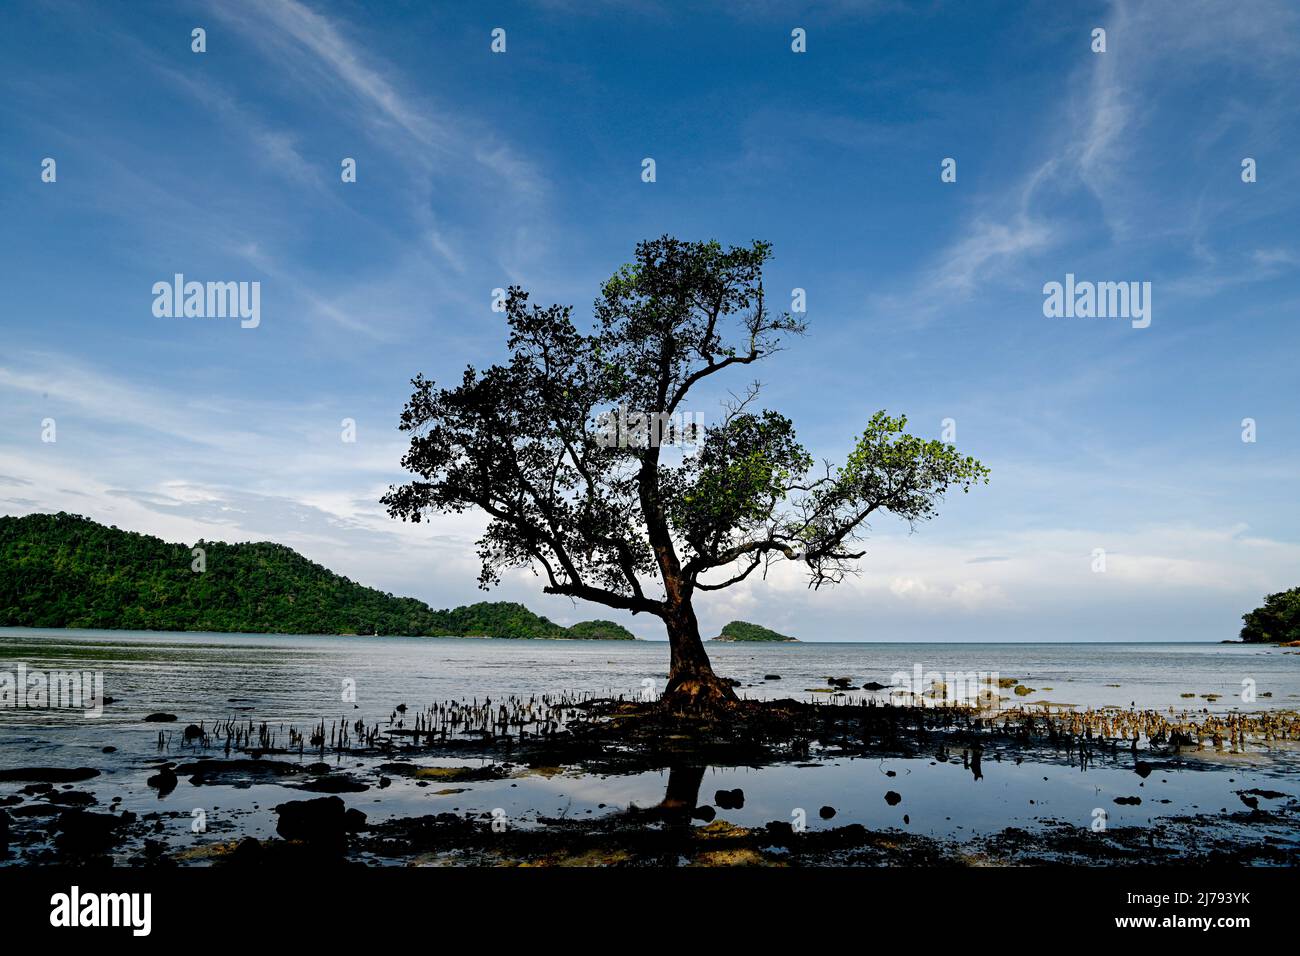 The resort's lonely tree at Blue Haven Bay by Siam Royal View at Chang Noi Beach, Koh Chang Island in Trat province. Koh Chang is a popular tourist resort island situated about 350 km southeast of the capital, Bangkok. Stock Photo